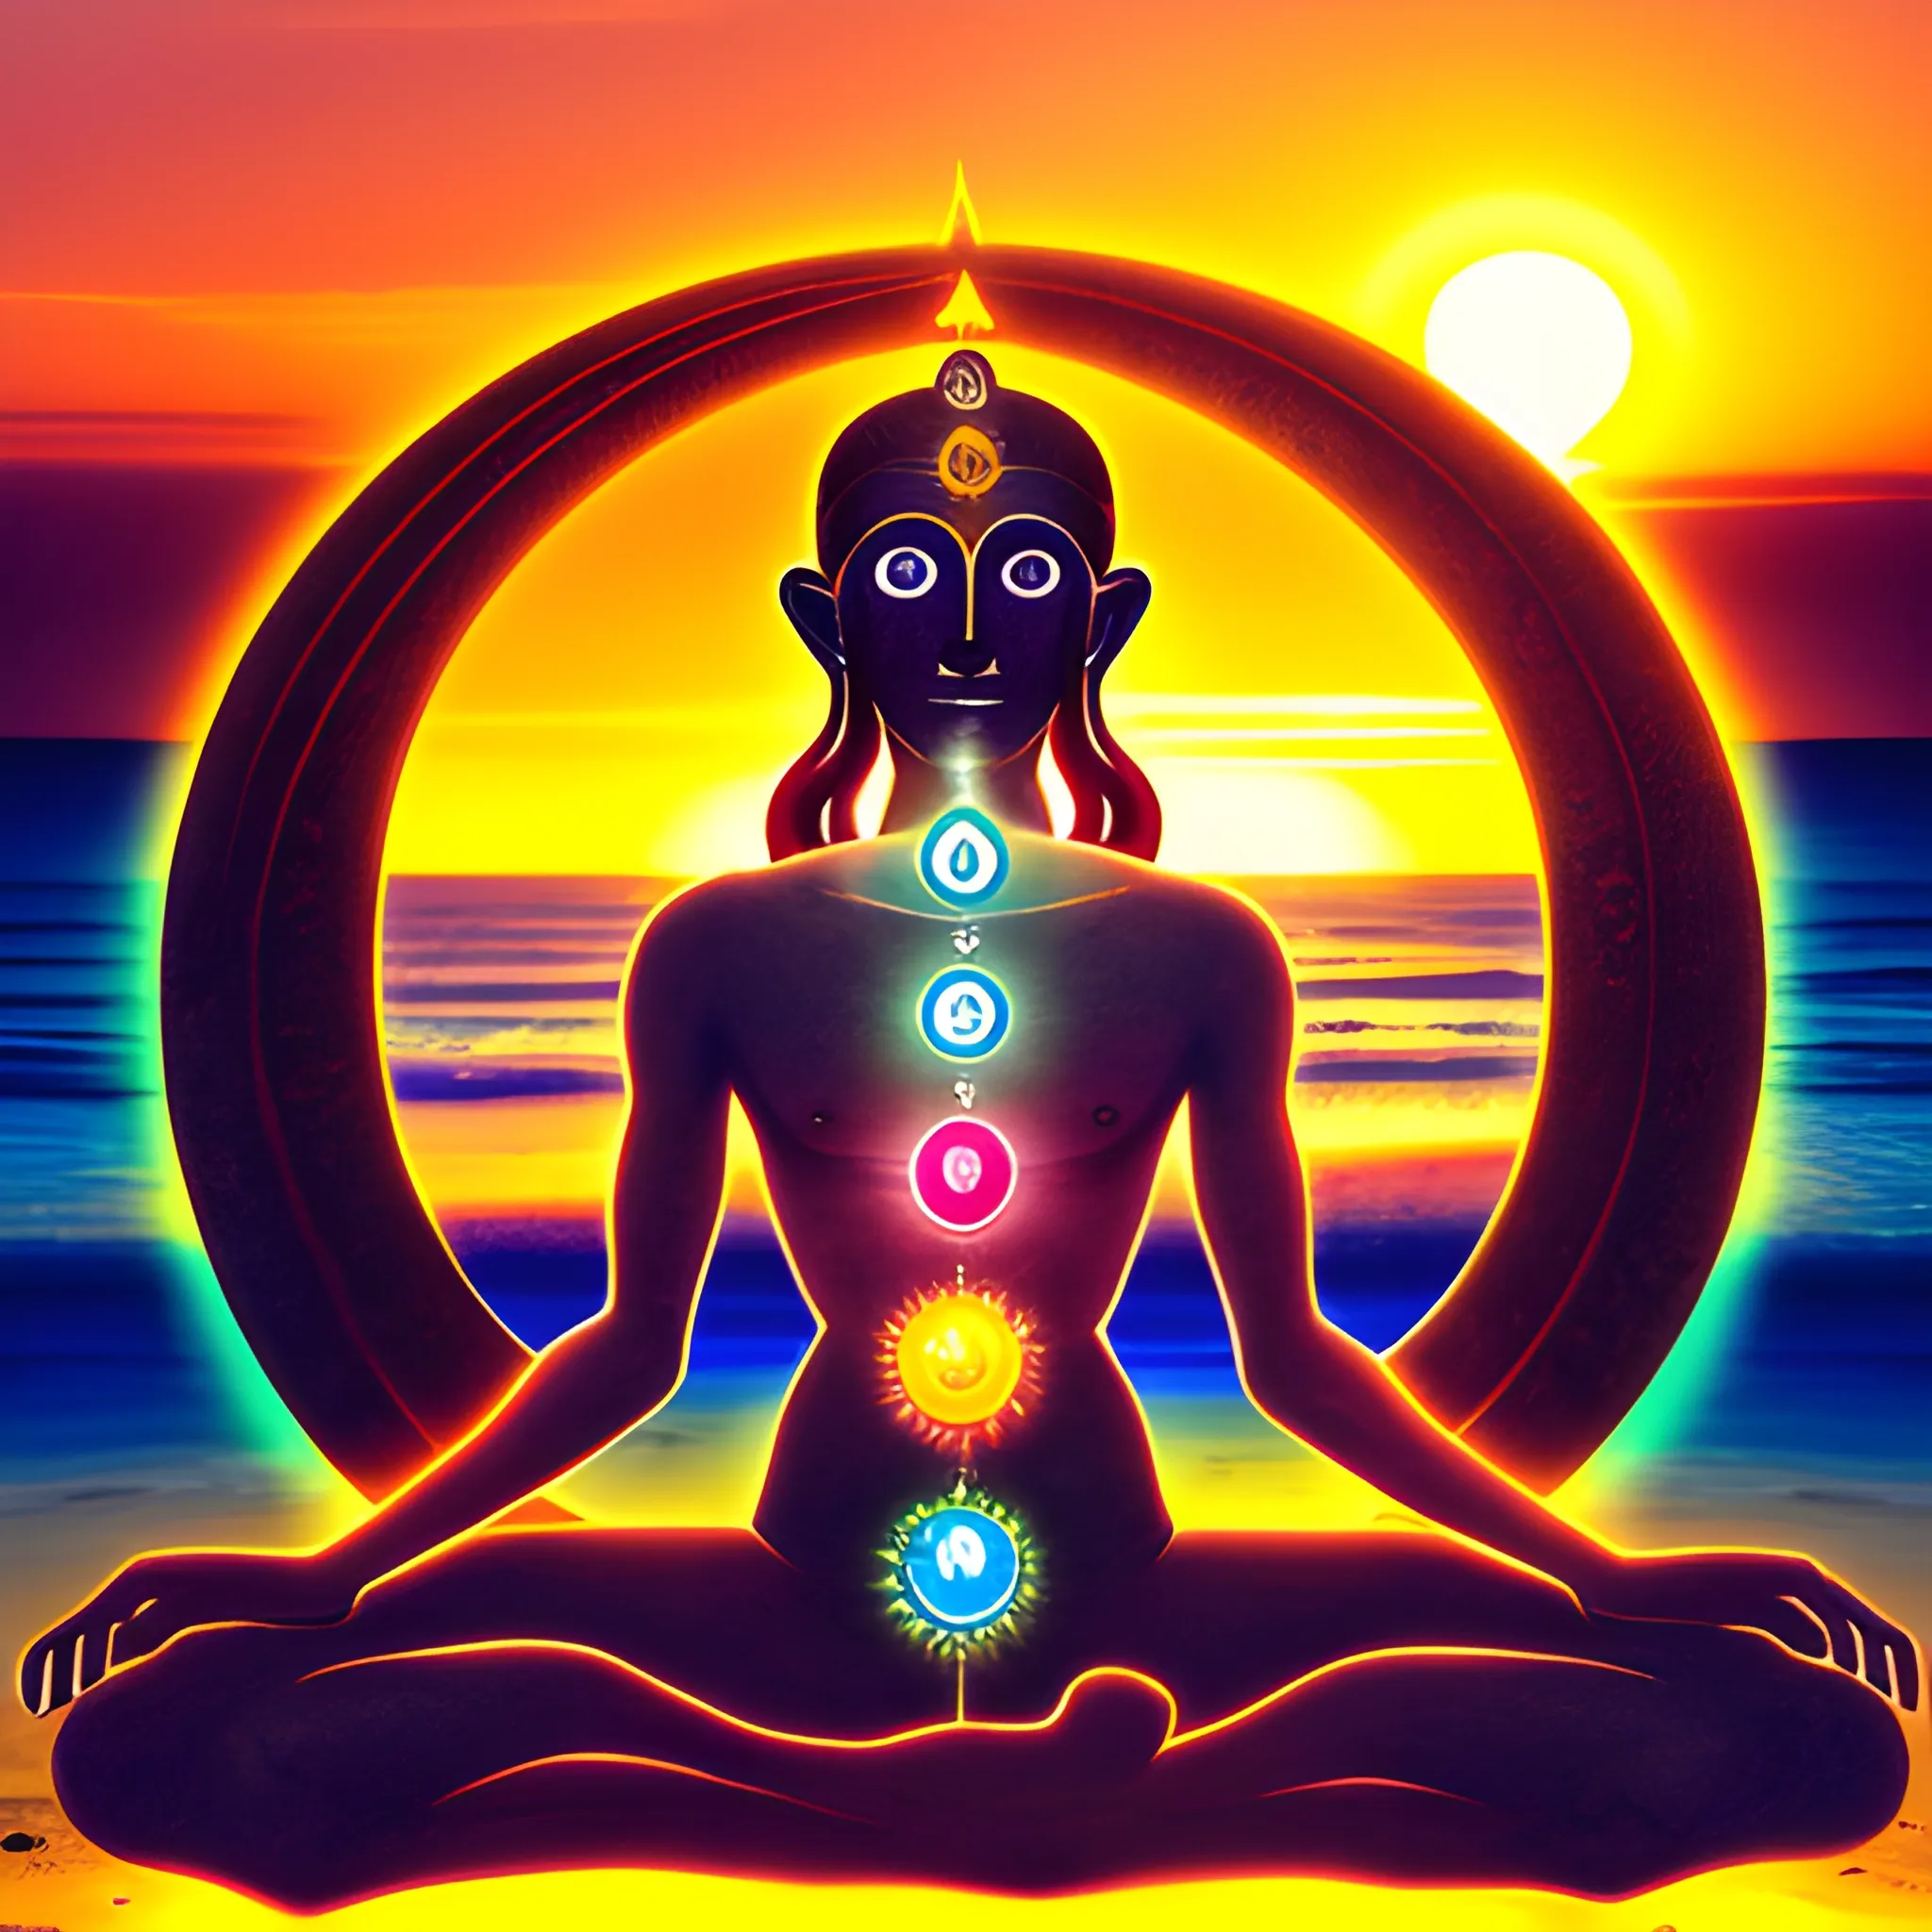 human being with the seven chakras, beach, sunset, universe, moon, caduceus hermes, road, initiation.


